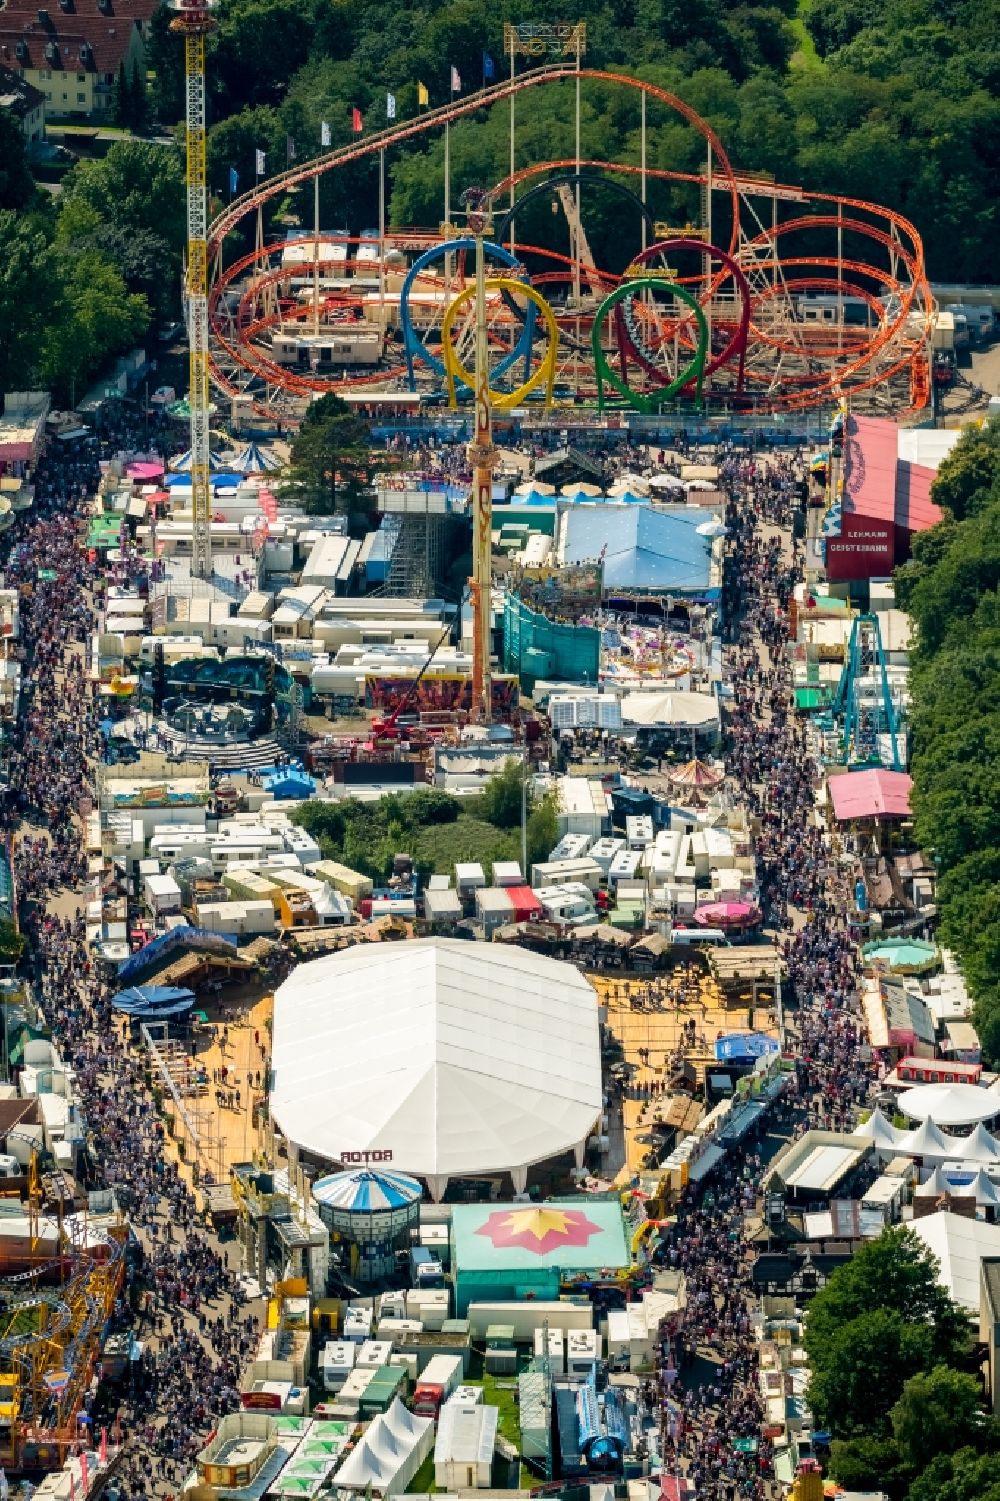 Herne from above - Fair - event location at festival Cranger Kirmes in the district Cranger in Herne in the state North Rhine-Westphalia, Germany